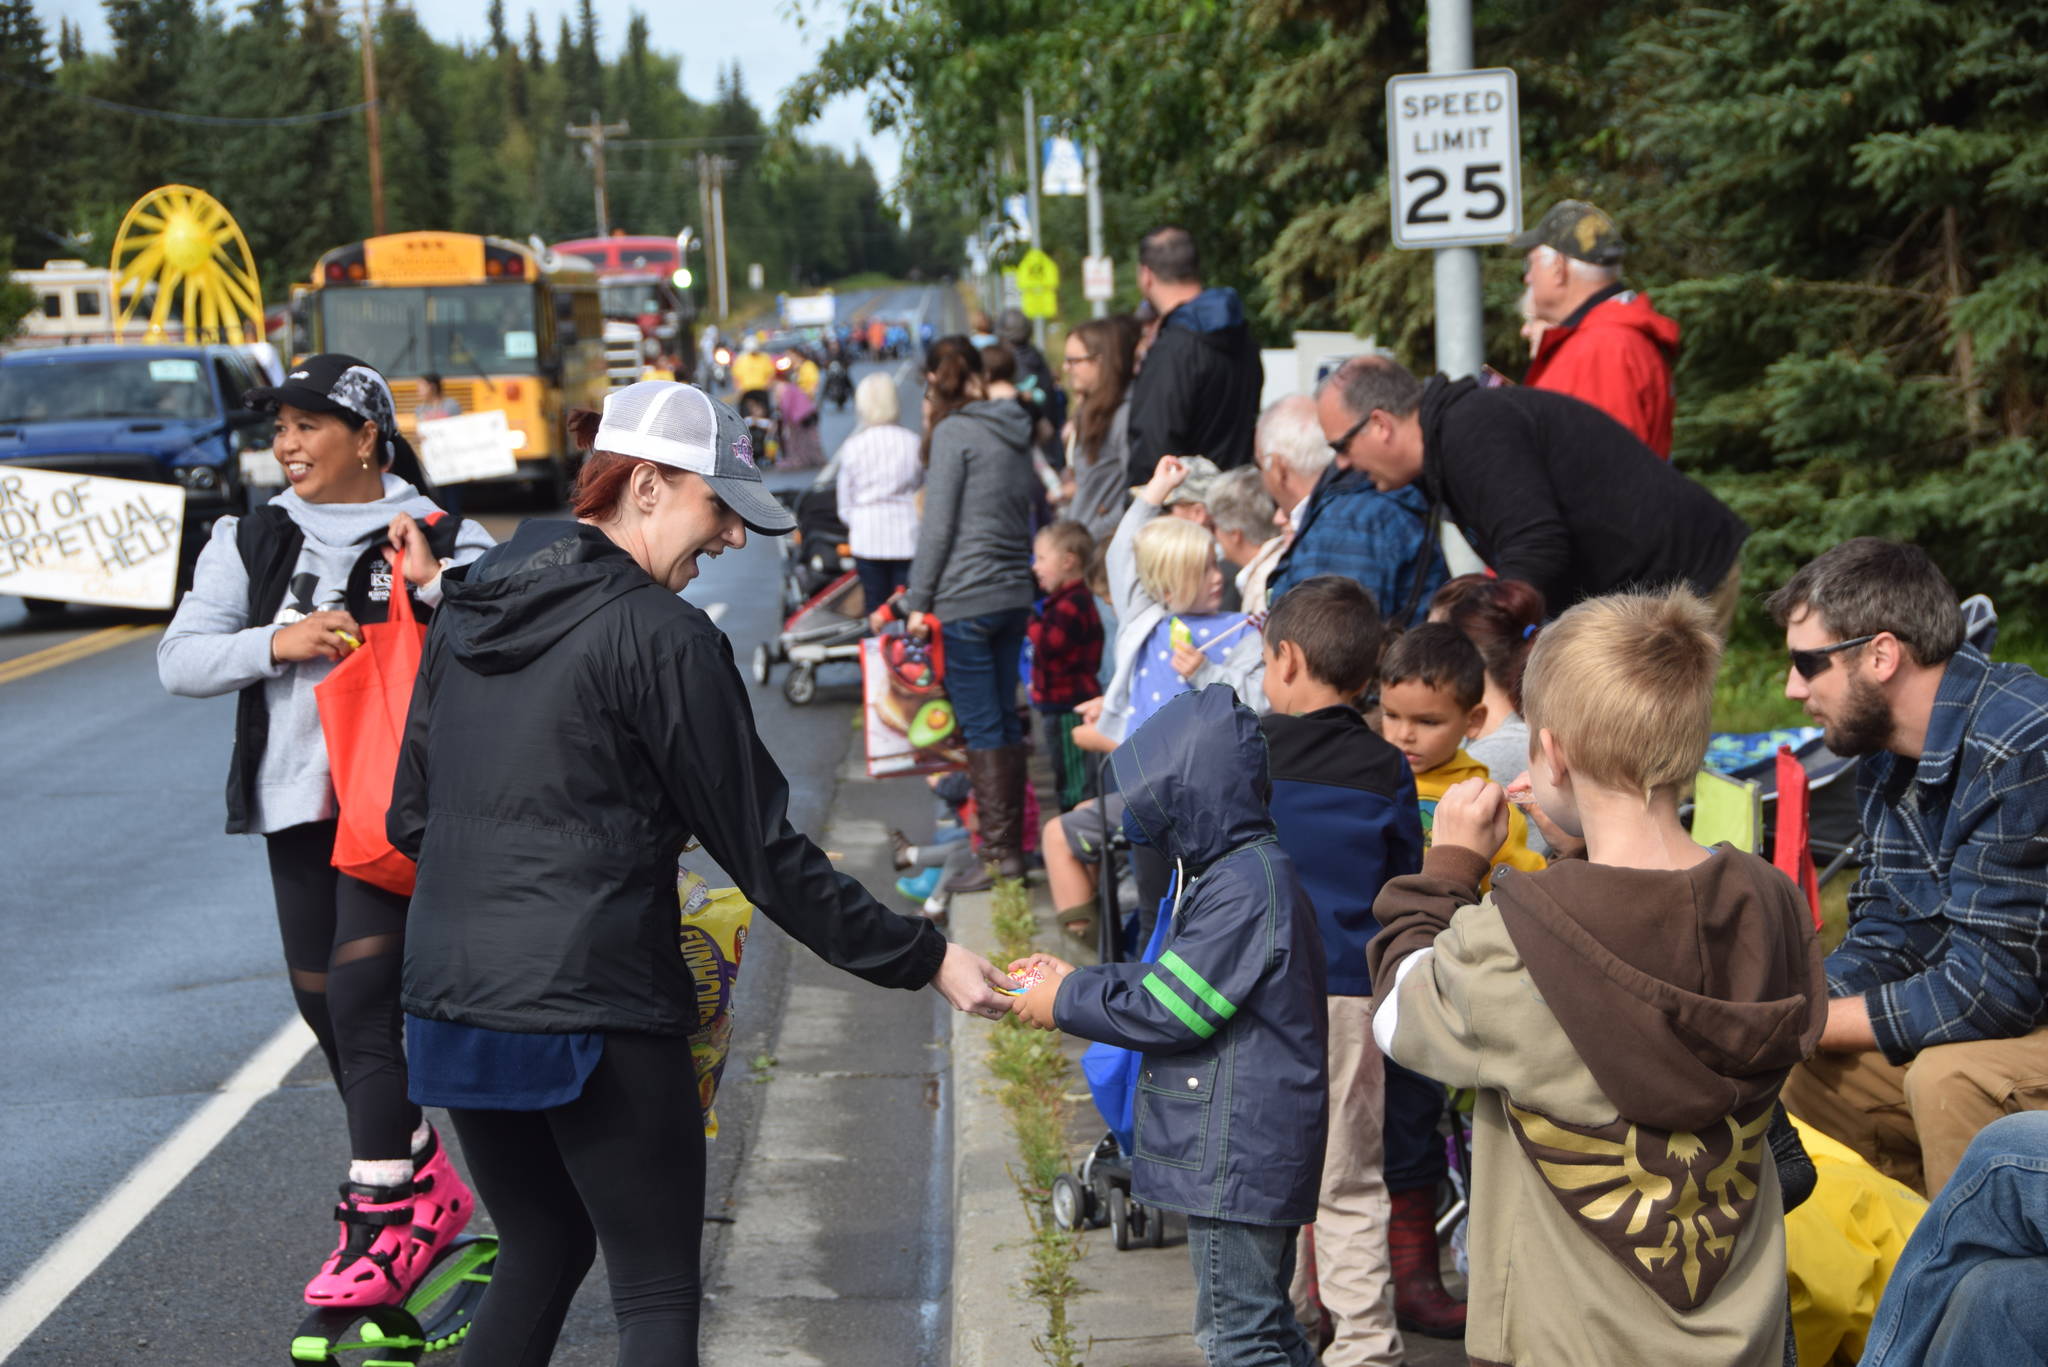 Jennifer Williams of KSRM hands out candy during Soldotna’s Progress Day Parade in Soldotna, Alaska on July 27, 2019. (Photo by Brian Mazurek/Peninsula Clarion)